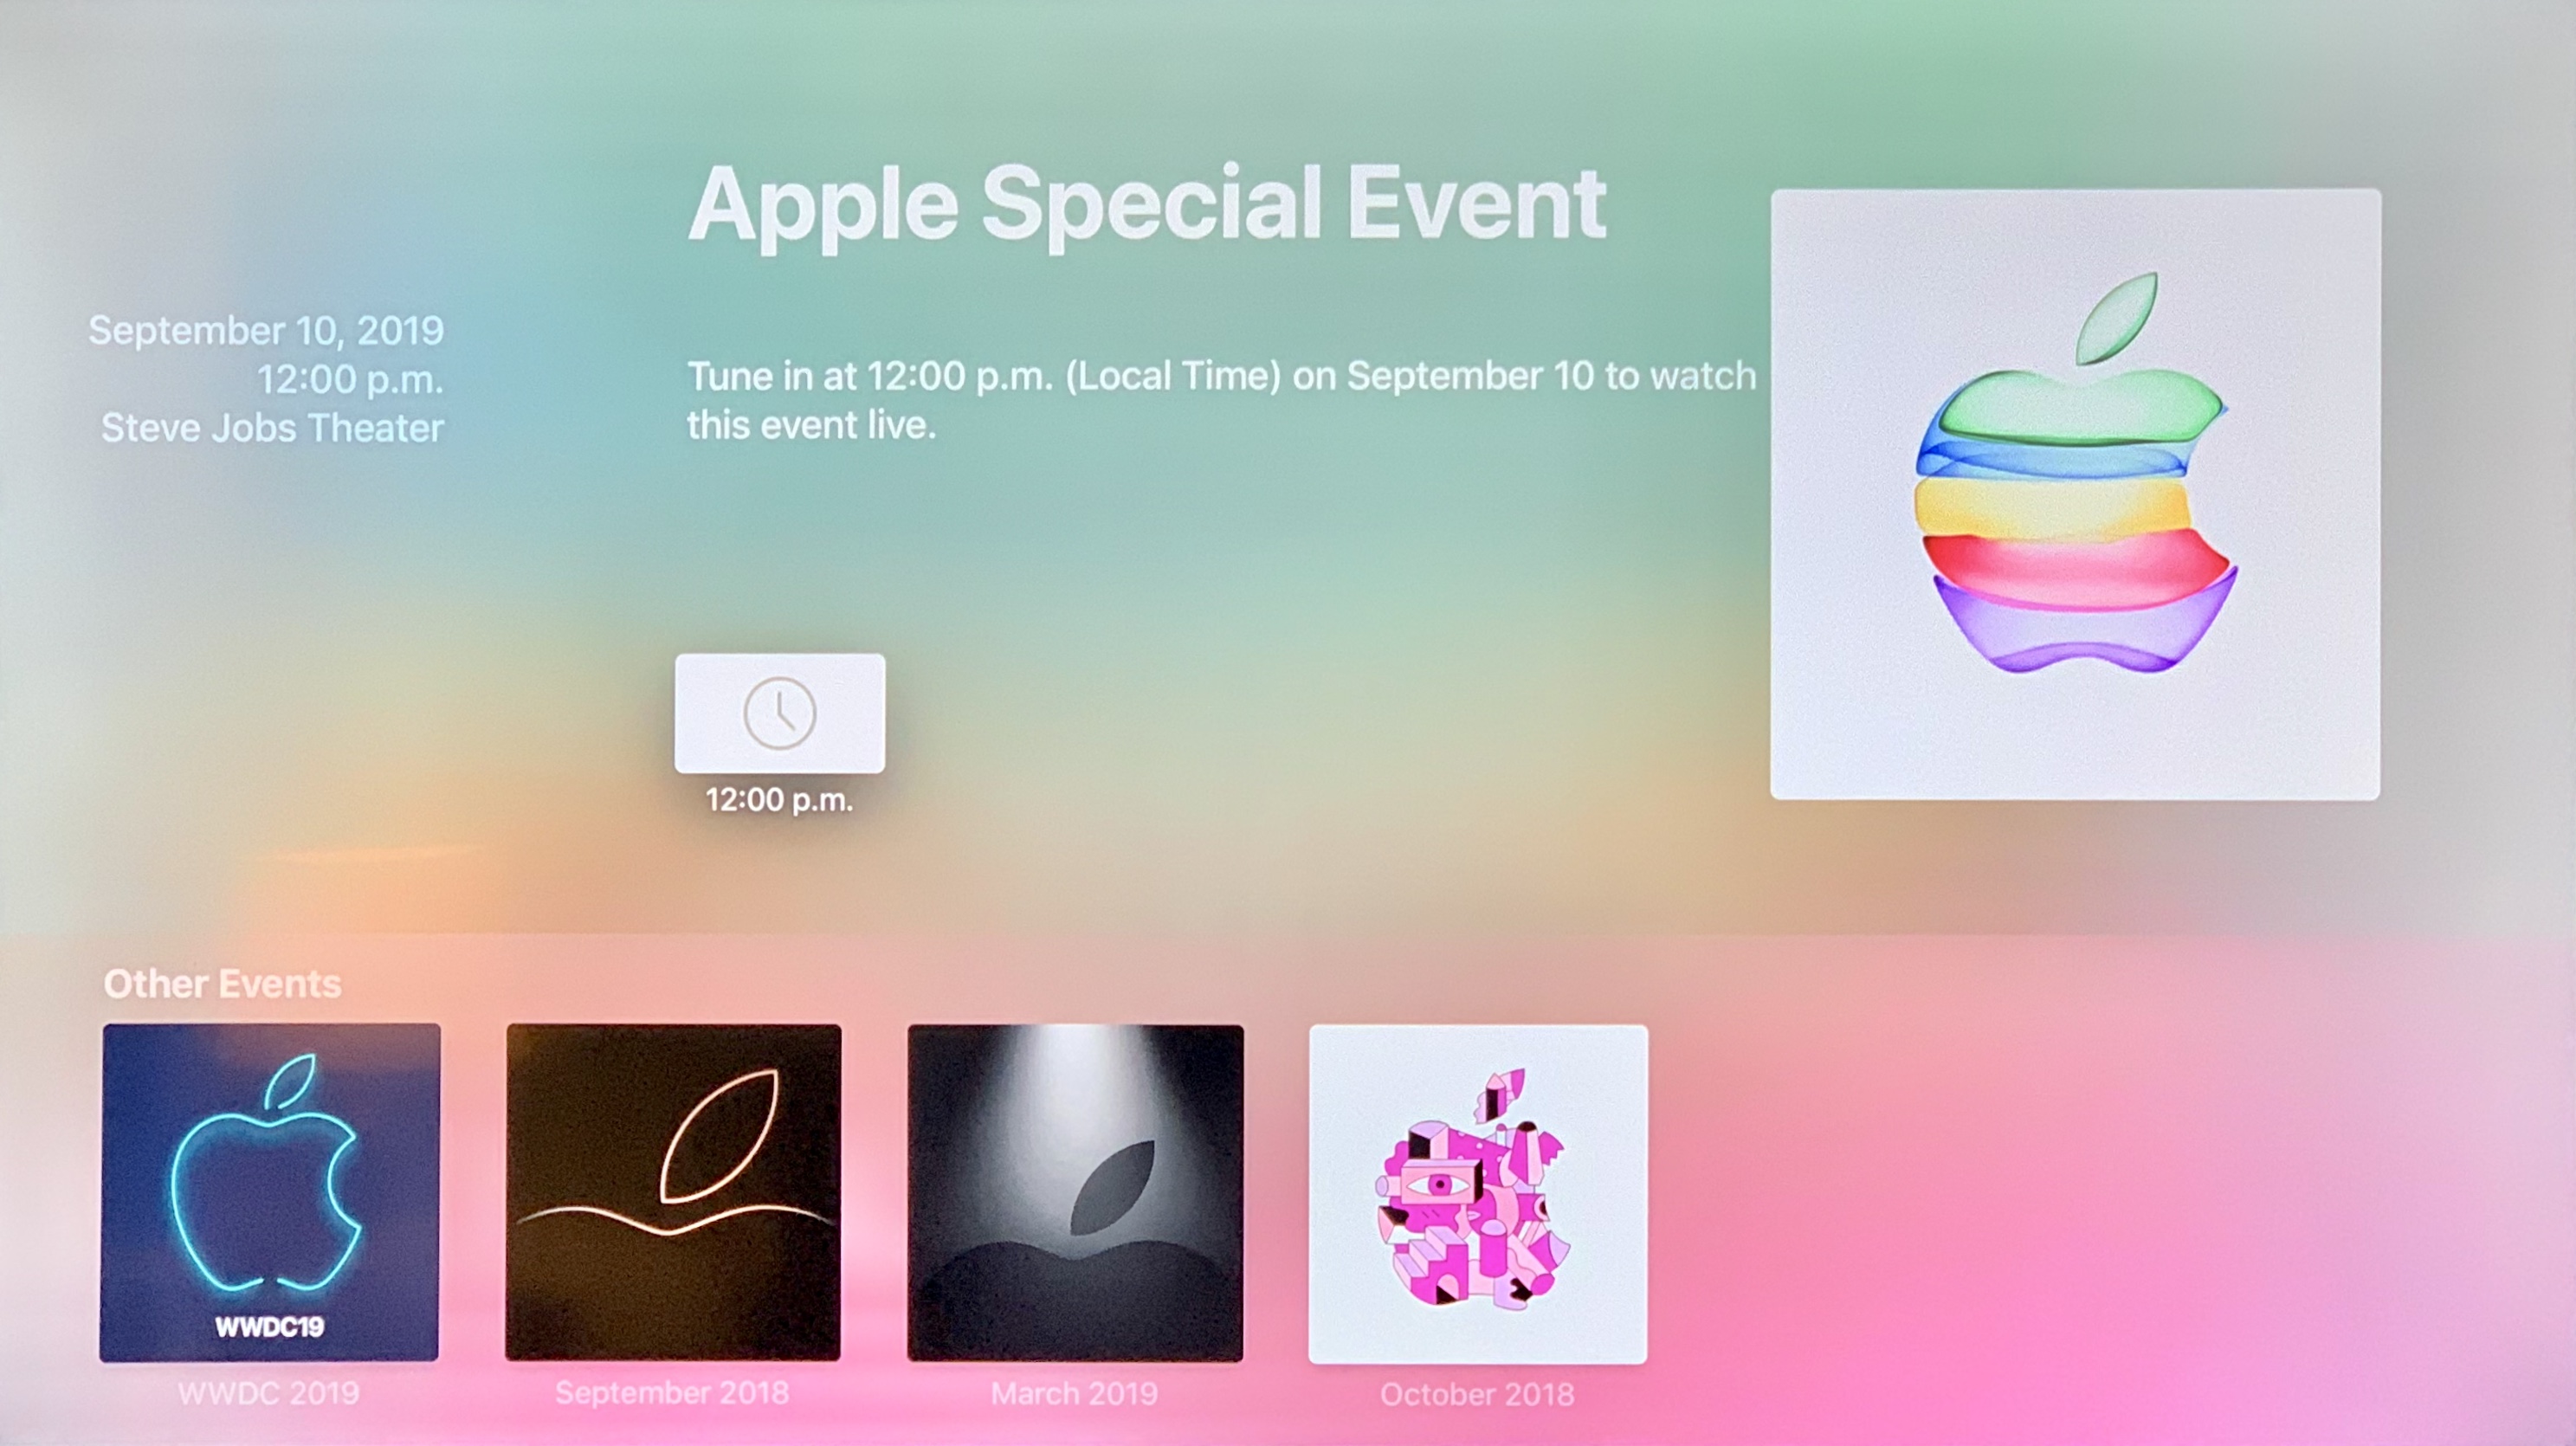 How to View Today's "By Innovation Only" Apple Event